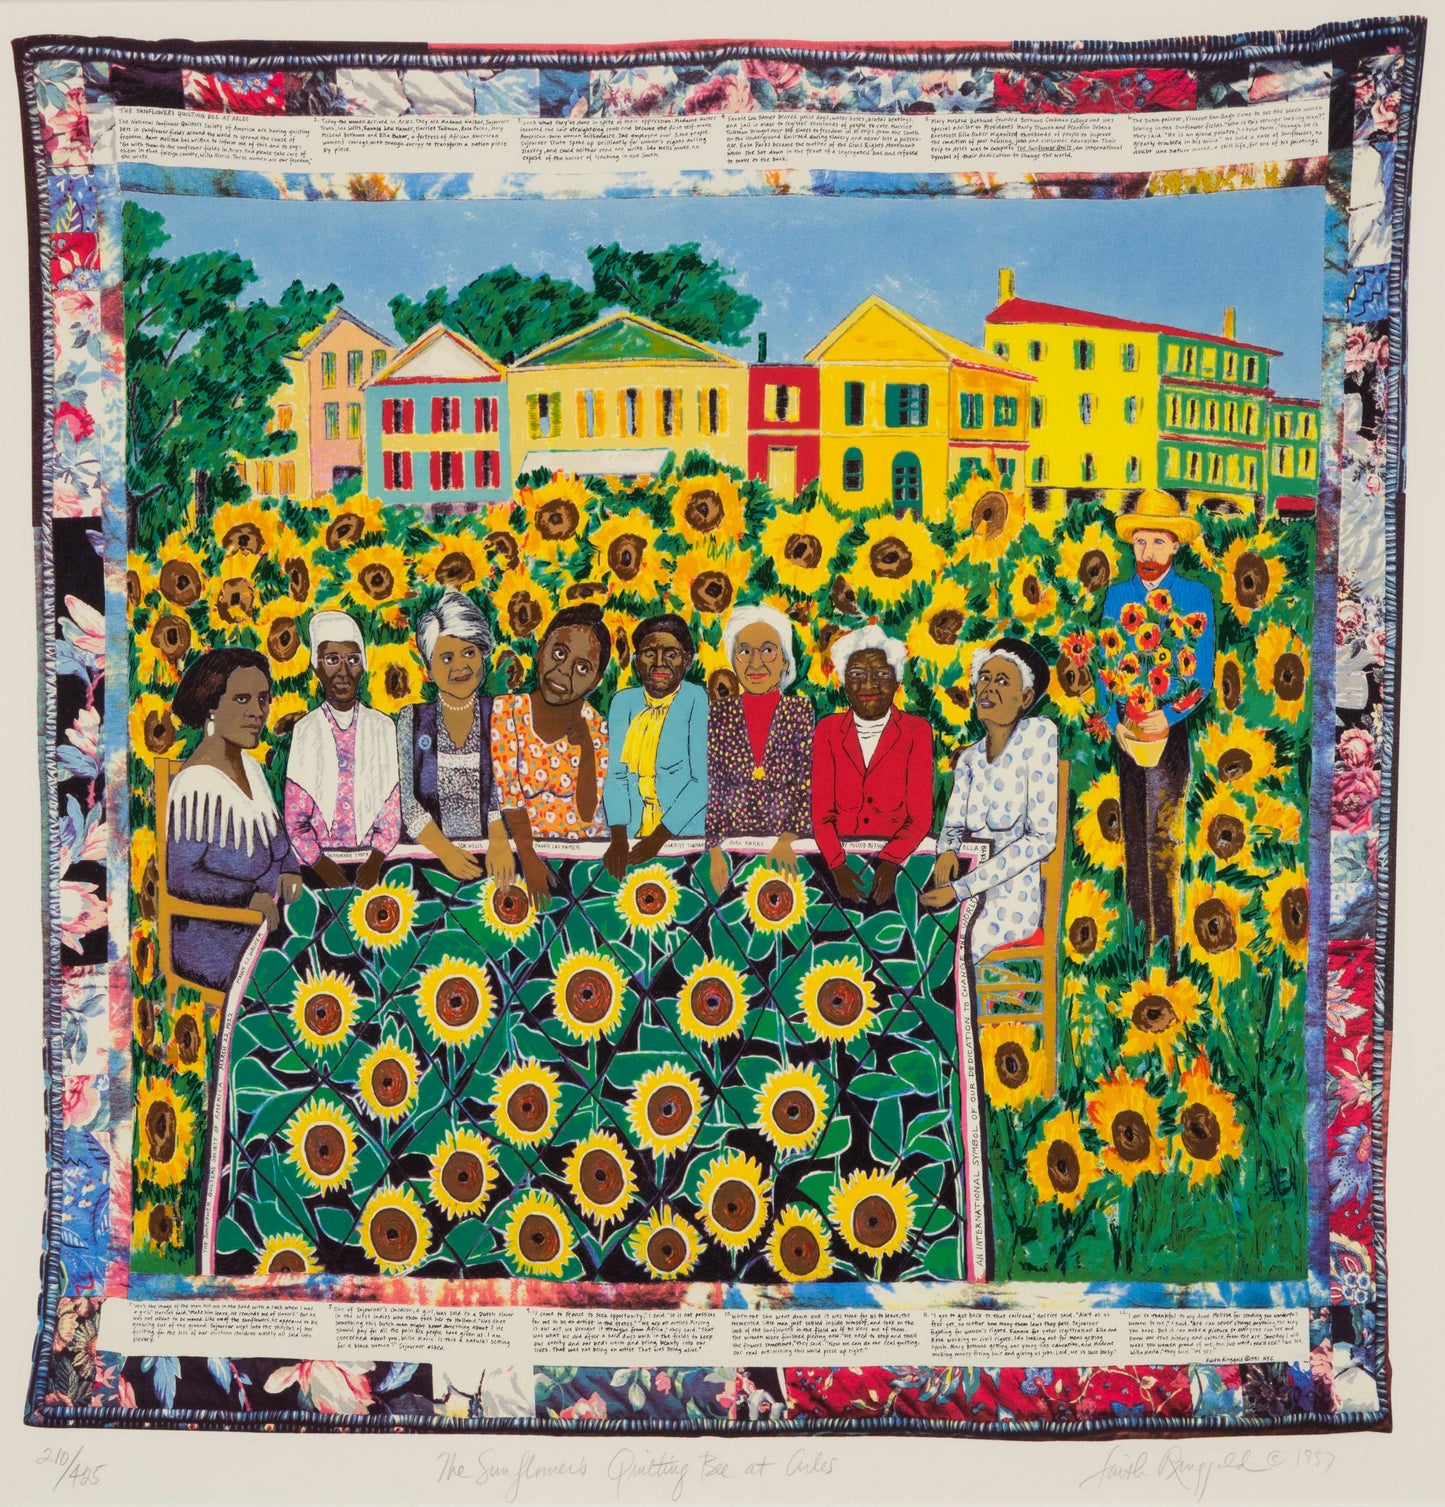 FAITH RINGGOLD "The Sunflower Quilting Bee at Arles" (1997)